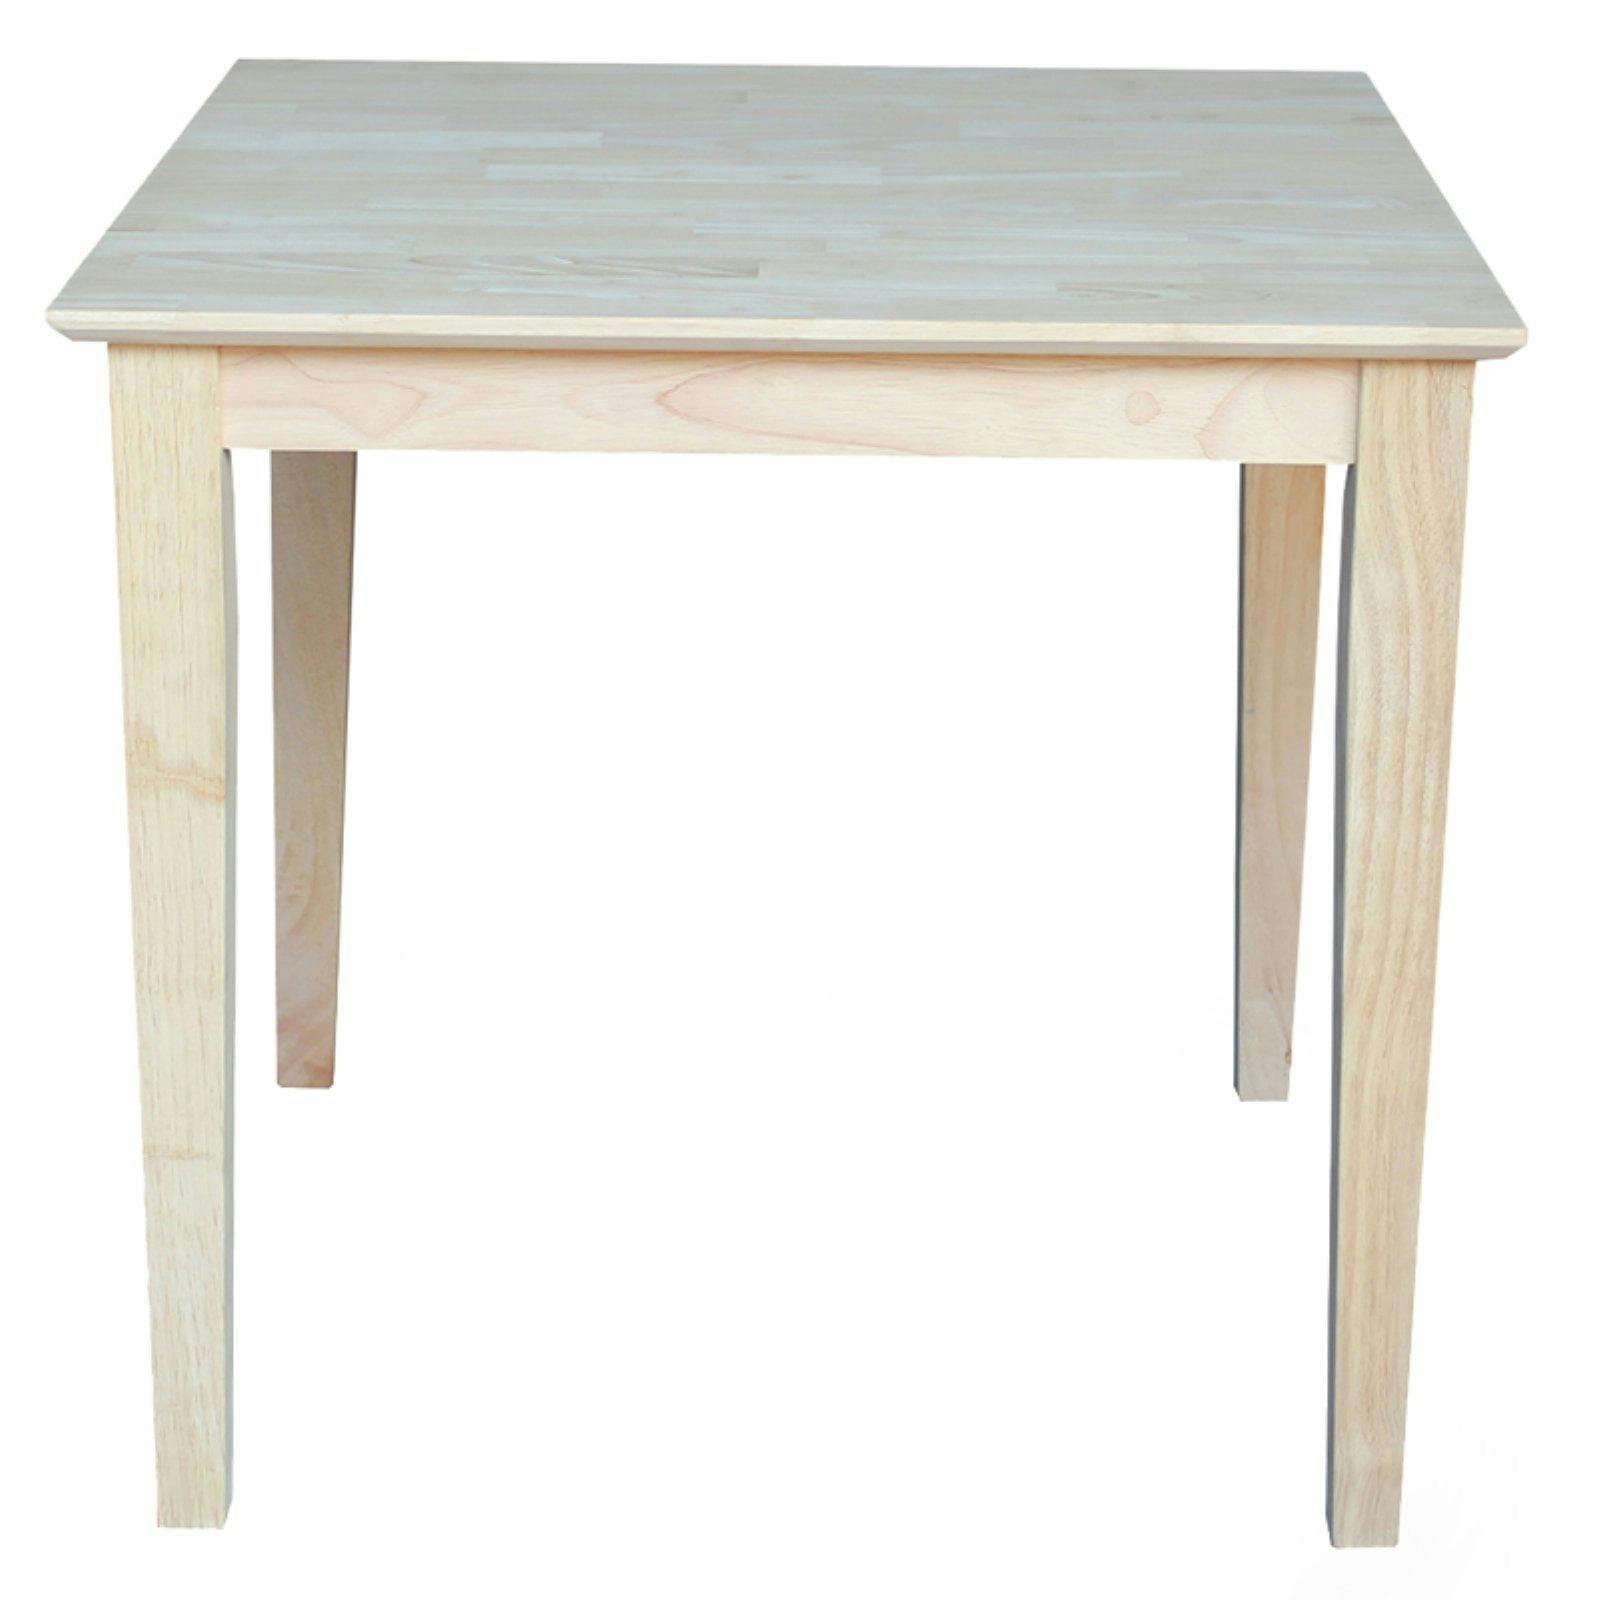 Elegant Solid Wood Extendable Square Dining Table in Natural Finish